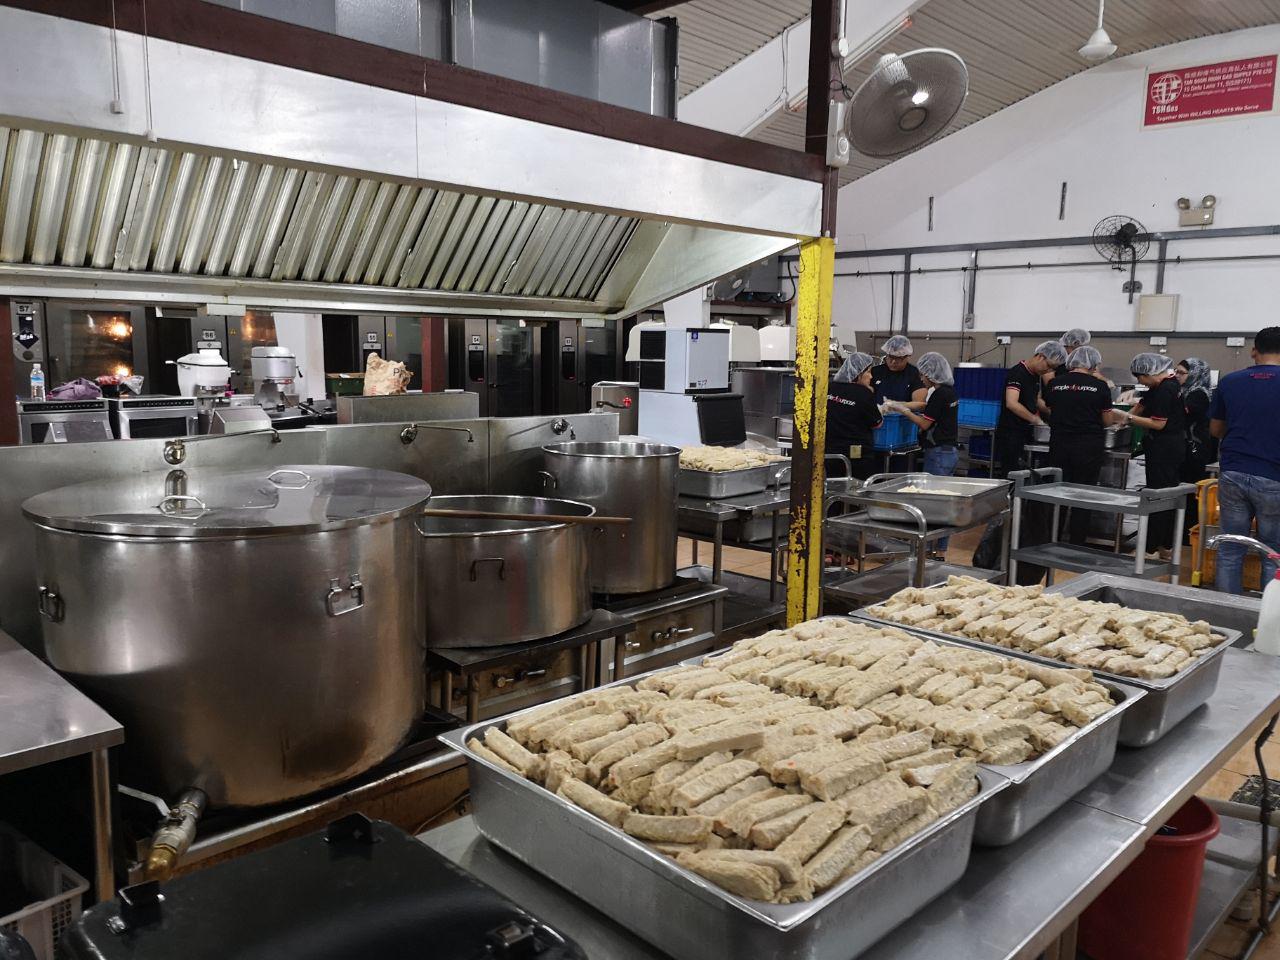 The kitchen, where volunteers assist cooks with the preparation of meals.